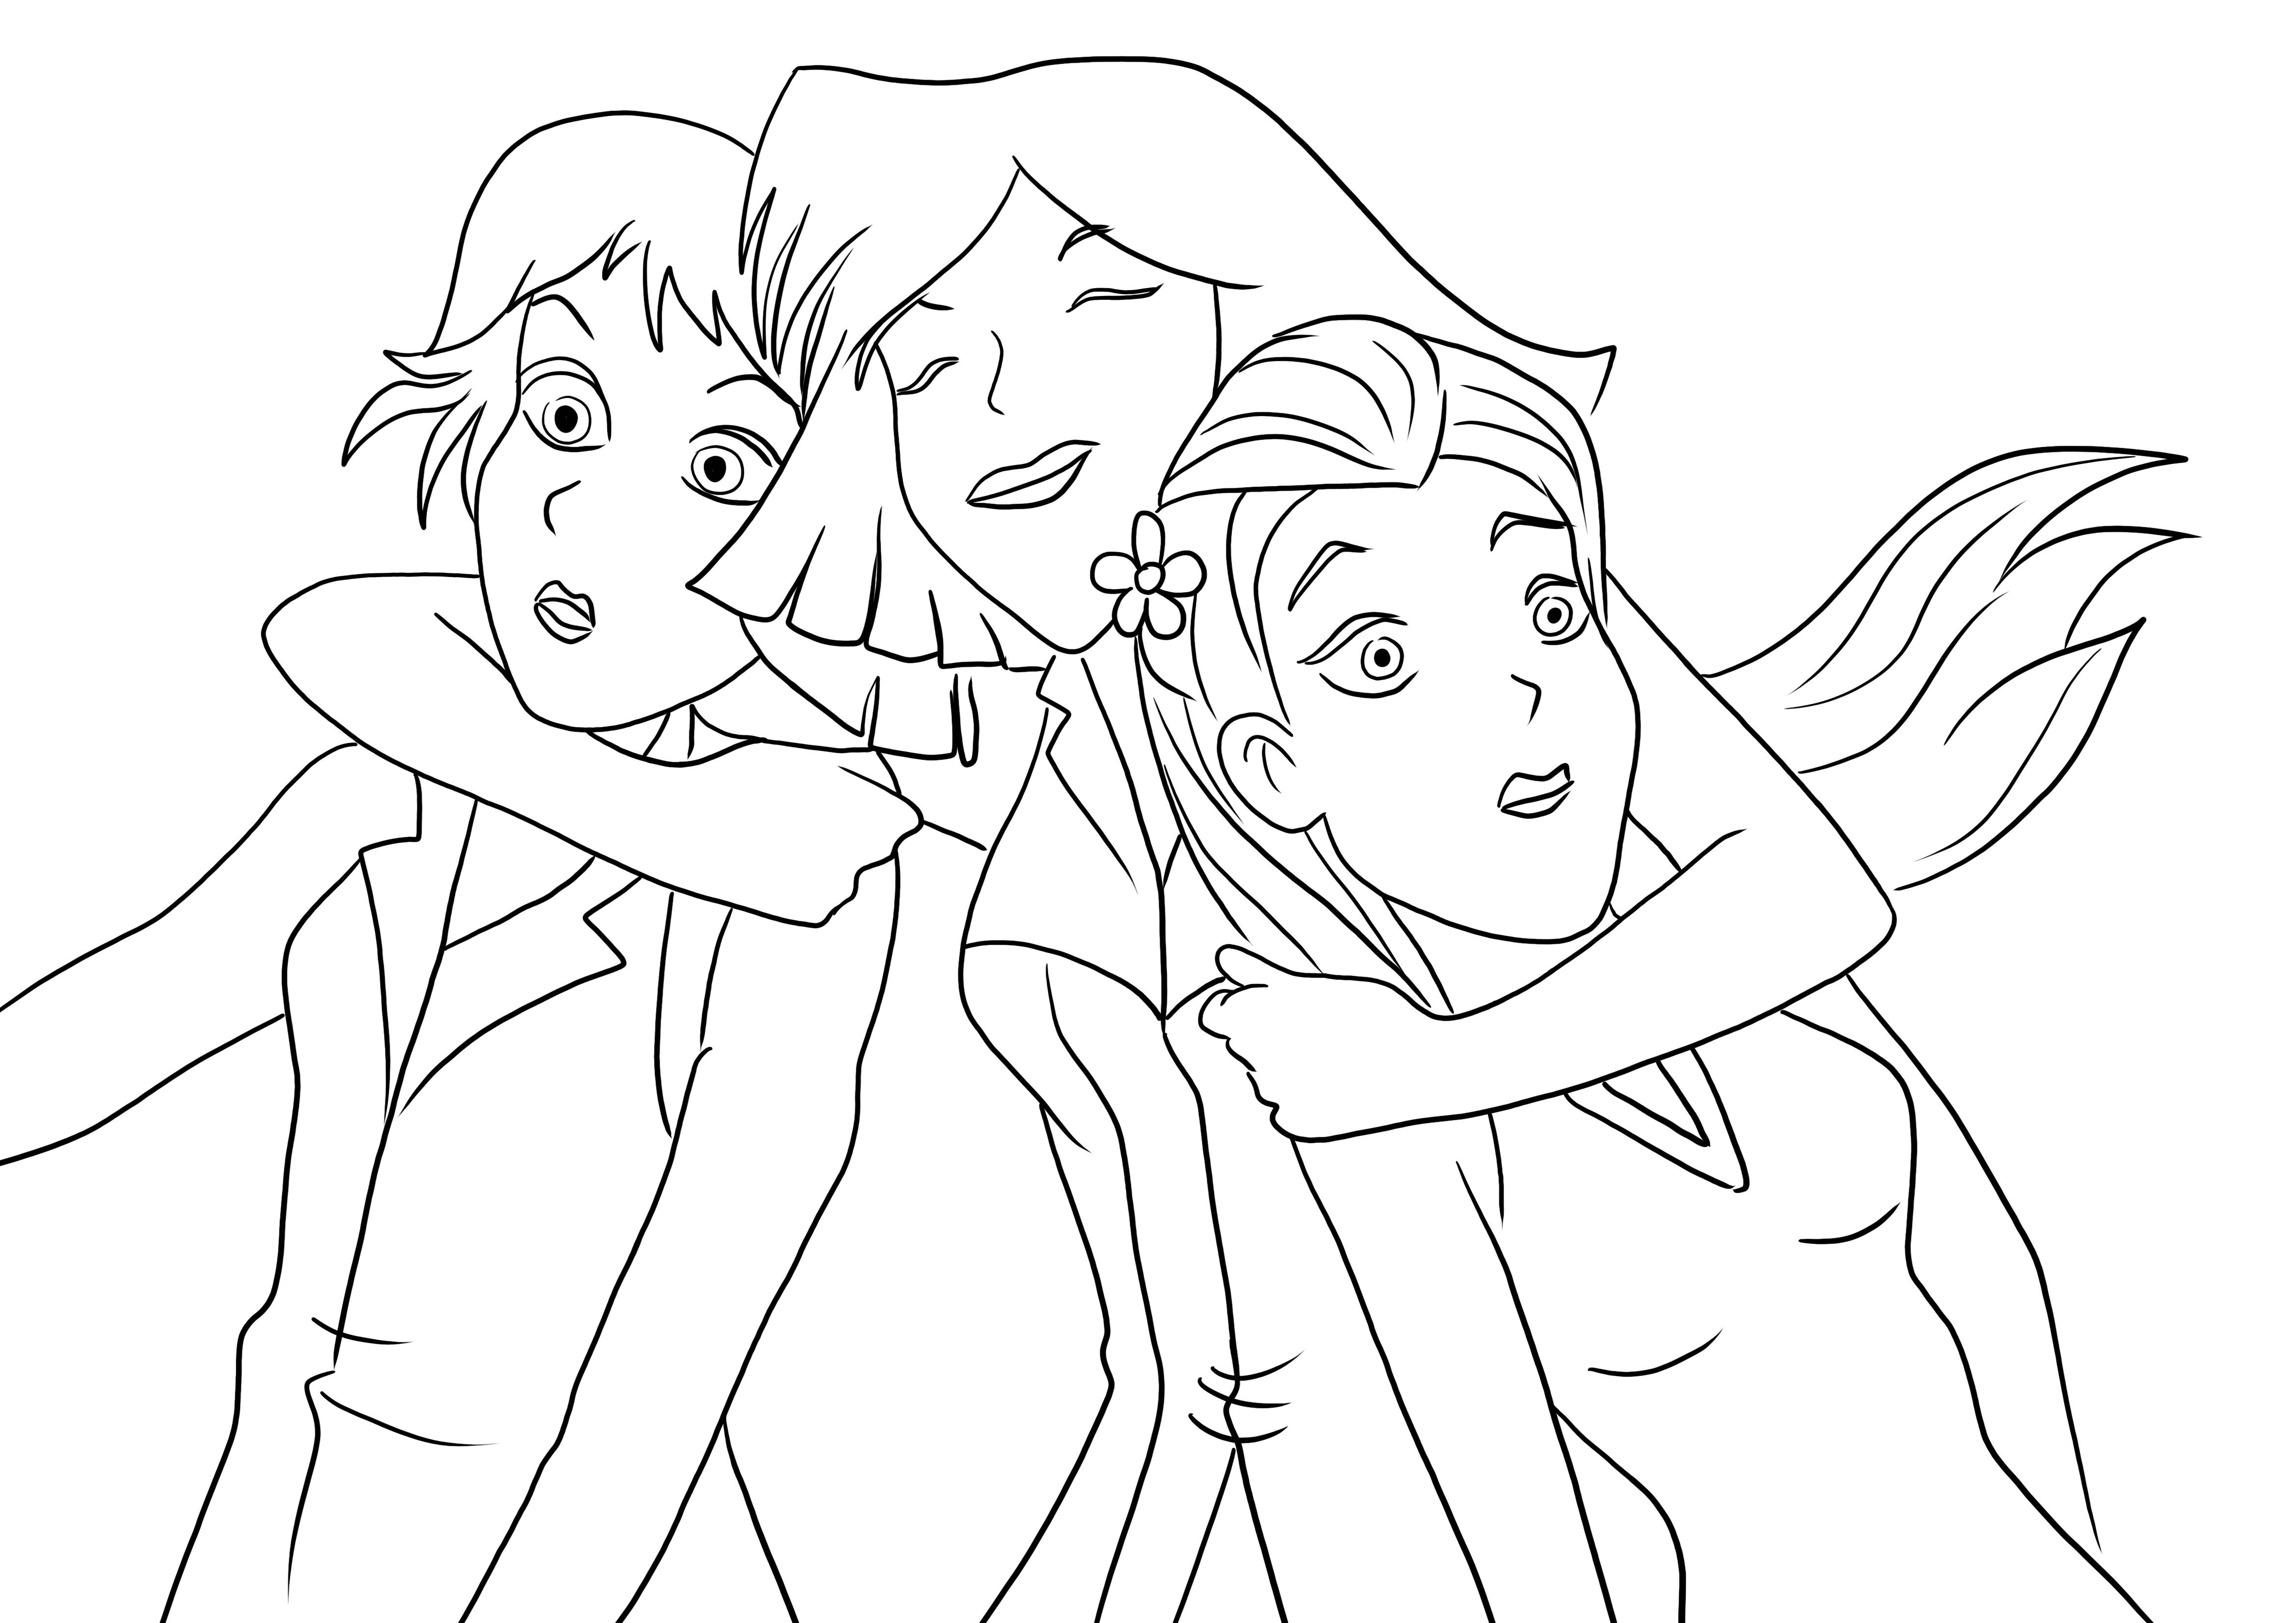 All Totally Spies three friends to be printed and free coloring image